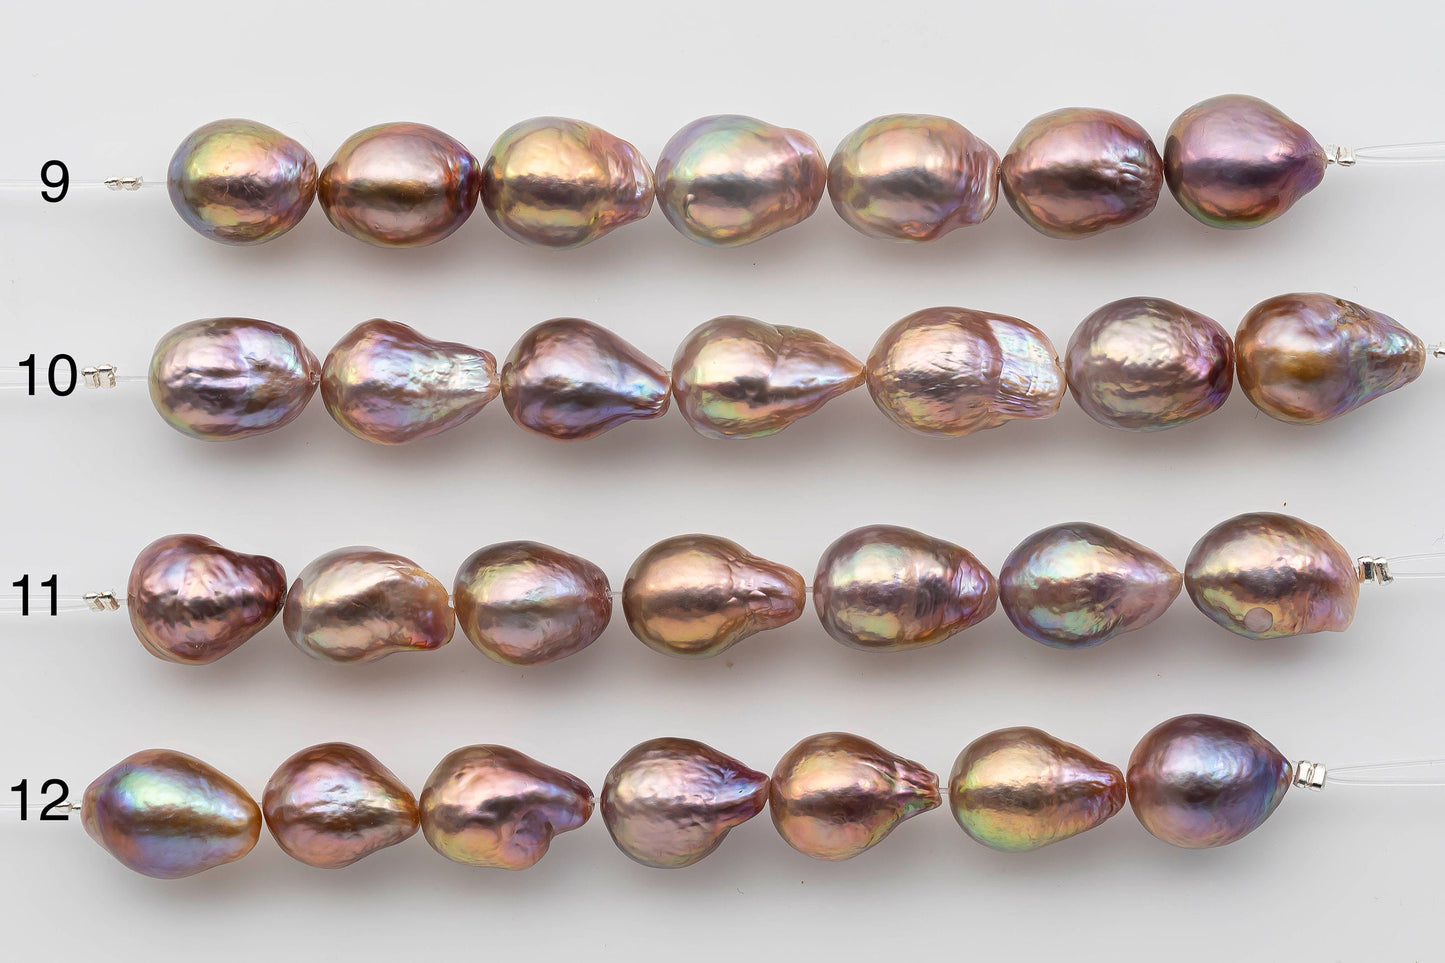 11-12mm Edison Pearl Tear Drops or Near Round in Natural Colors and High Lusters Short Strand for Beading or Jewelry Making, SKU # 1332EP